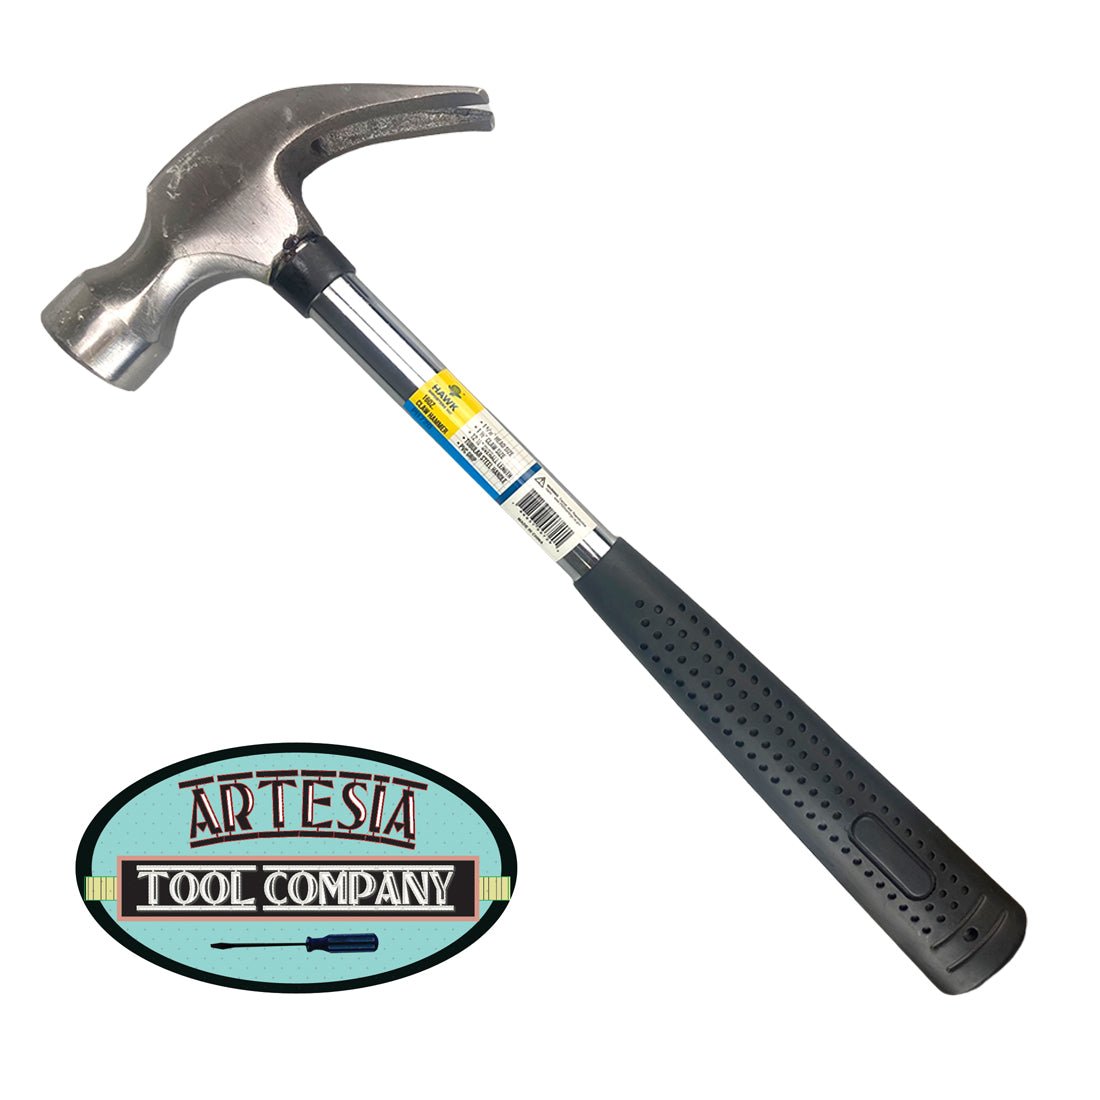 Heavy Duty Forged Metal Claw Hammer With Rubberised Grip -16oz - PH720 - ToolUSA